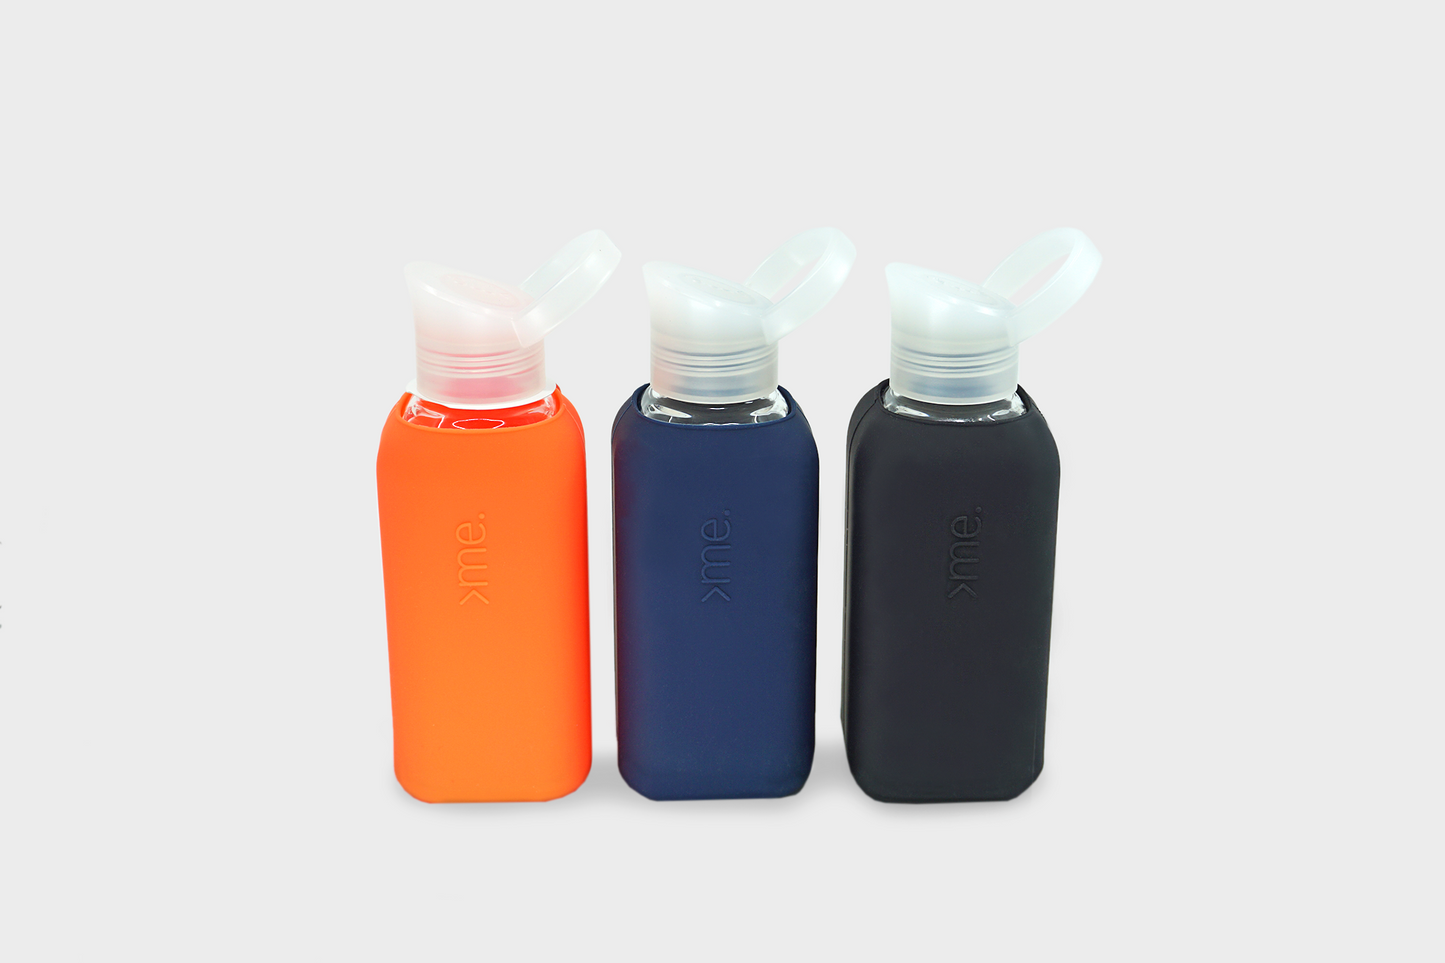 https://cdn.shopify.com/s/files/1/0563/8992/6982/products/waterbottles3_1445x.png?v=1657404120